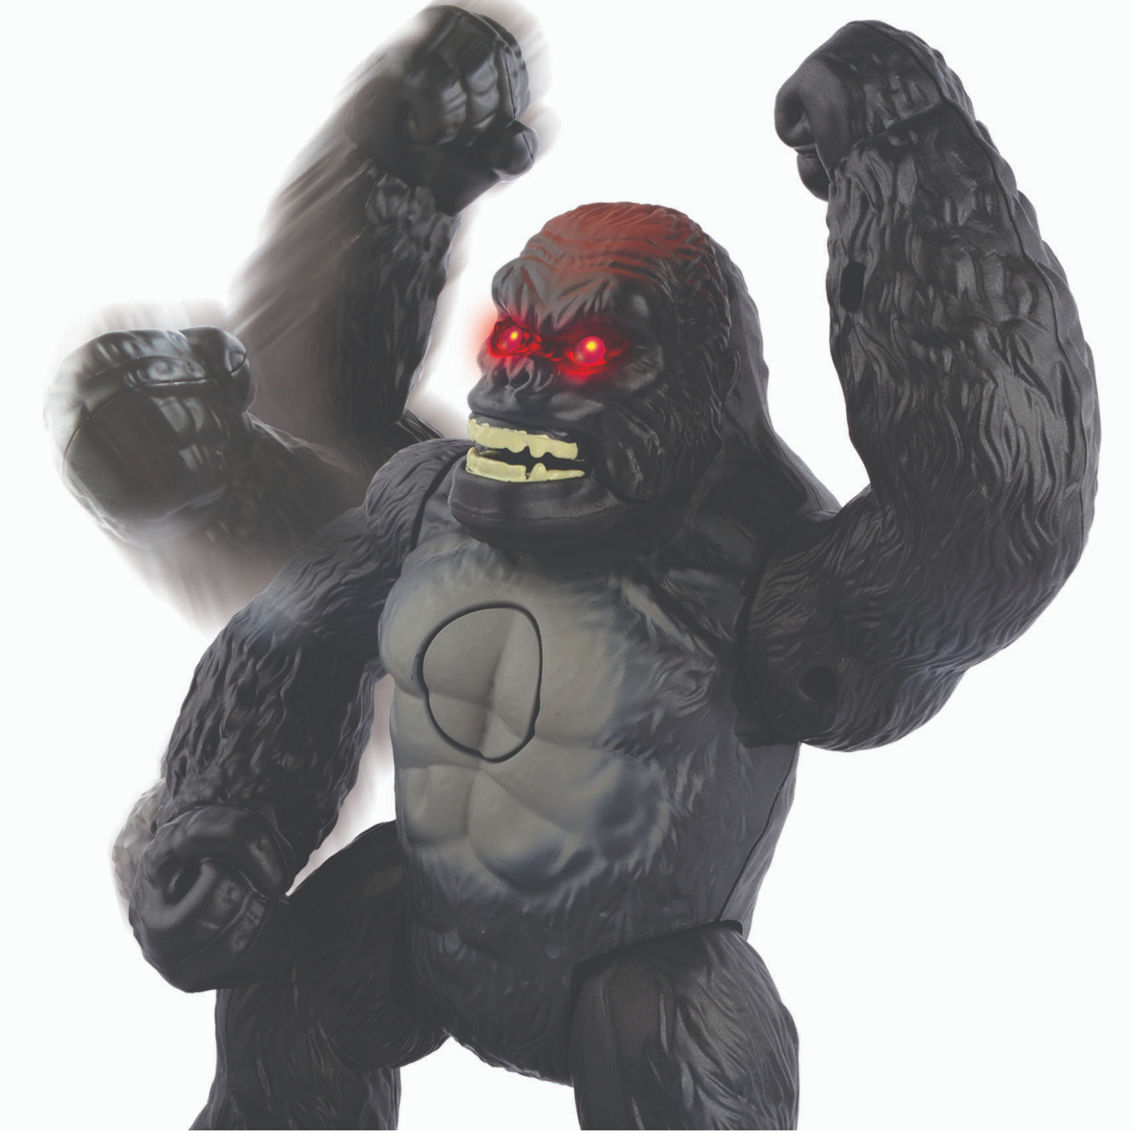 Red Box Light and Sound Walking Gorilla Toy - Image 5 of 6